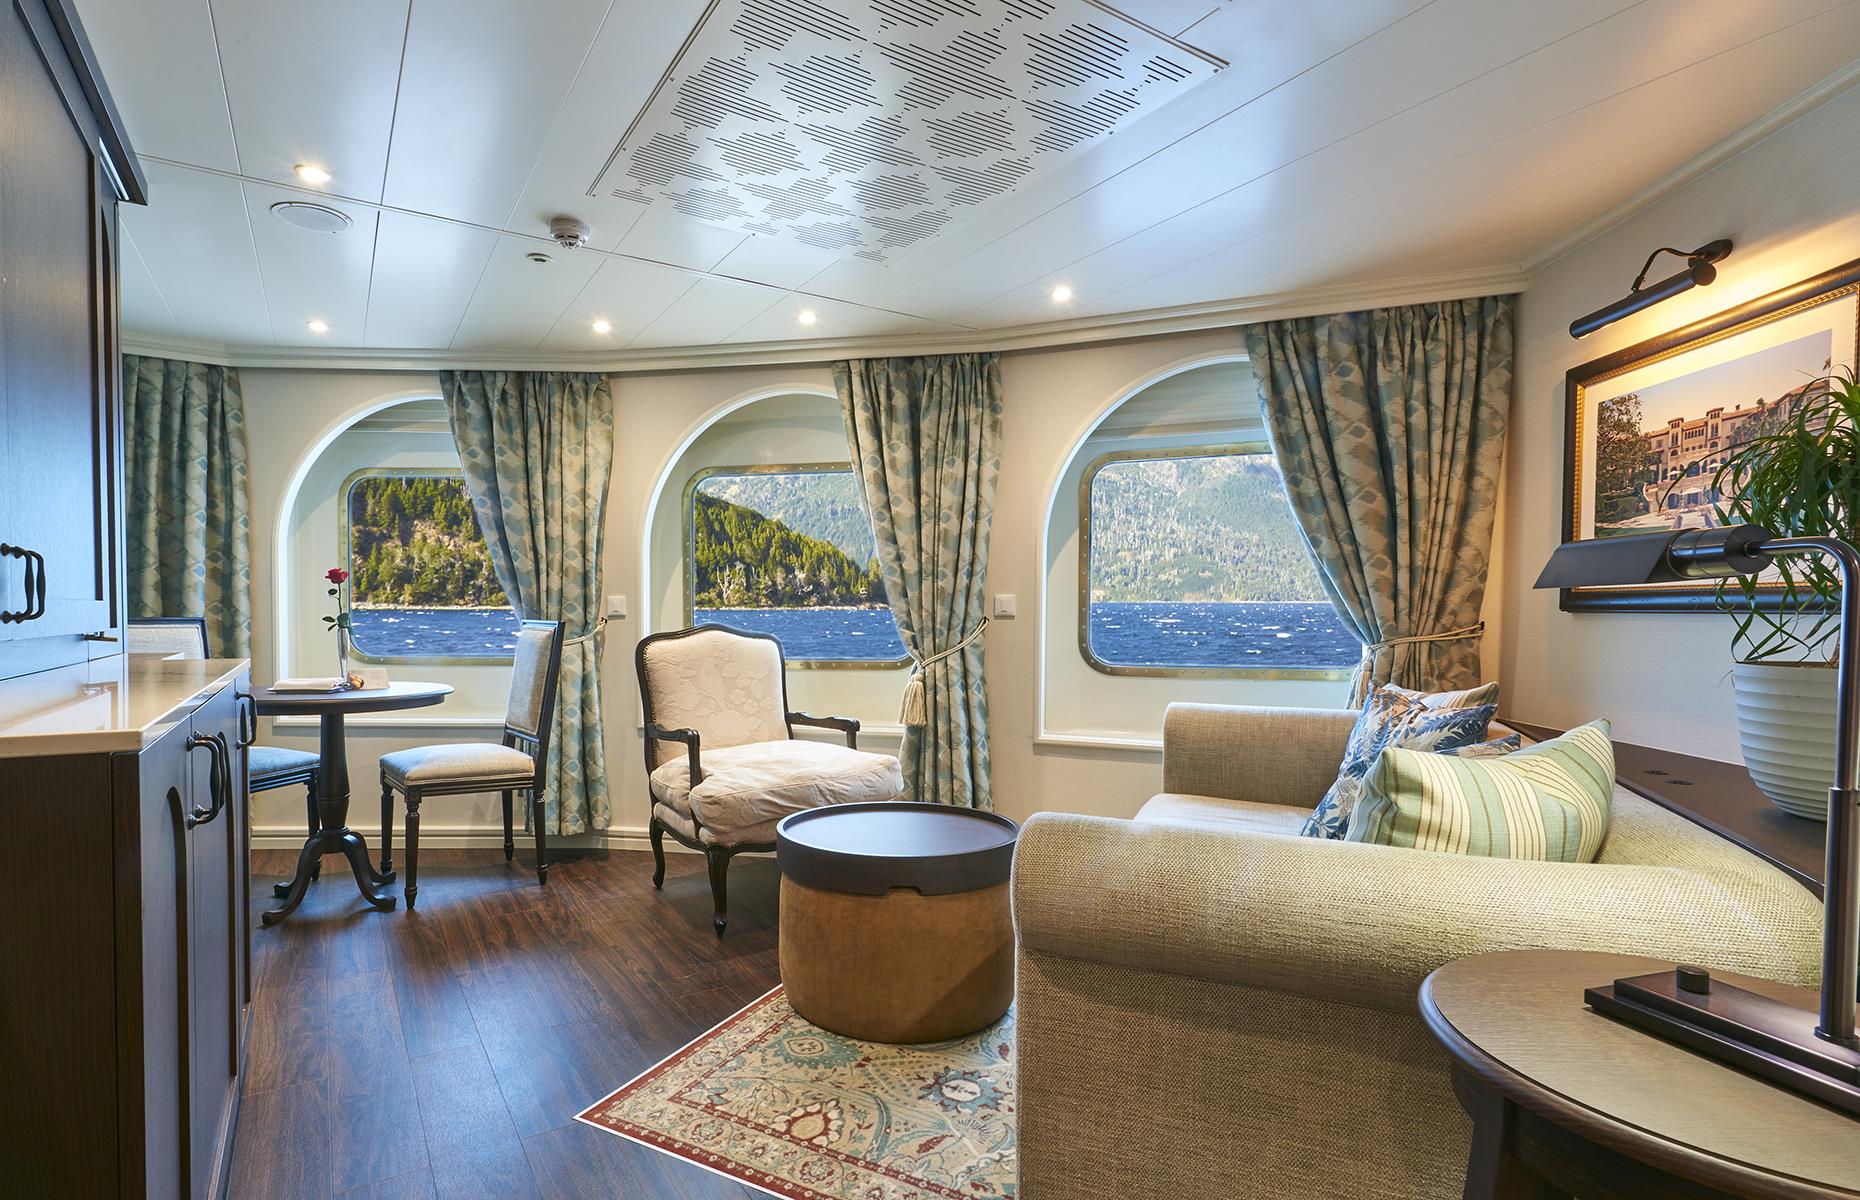 <p>Sail on <a href="https://www.windstarcruises.com/ships/star-legend/">Windstar Cruises’ Star Legend</a> and you can book a suite inspired by exotic destinations and hotels. We recommend the suite inspired by the Sea Island resort in Georgia. Expect ocean-inspired colourways and plenty of sea-glass green. A Treasures of the Greek Isles cruise with Windstar starts from £3,036 ($3,745) per person.</p>  <p><a href="https://www.loveexploring.com/galleries/92727/amazing-facts-about-cruise-ships-you-might-not-know?page=1"><strong>Now discover amazing facts about cruise ships you might not know</strong></a></p>